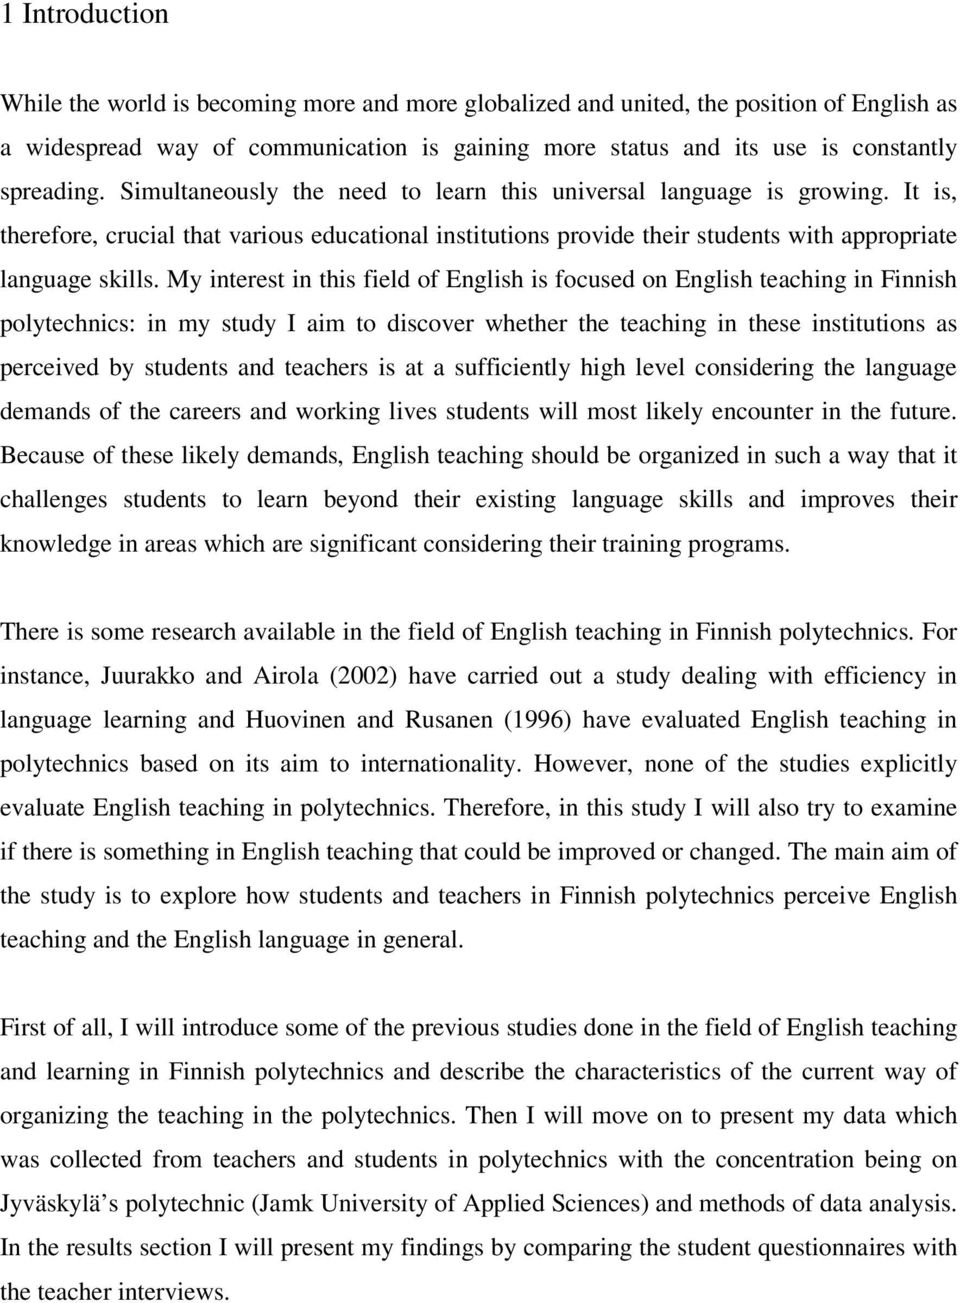 My interest in this field of English is focused on English teaching in Finnish polytechnics: in my study I aim to discover whether the teaching in these institutions as perceived by students and